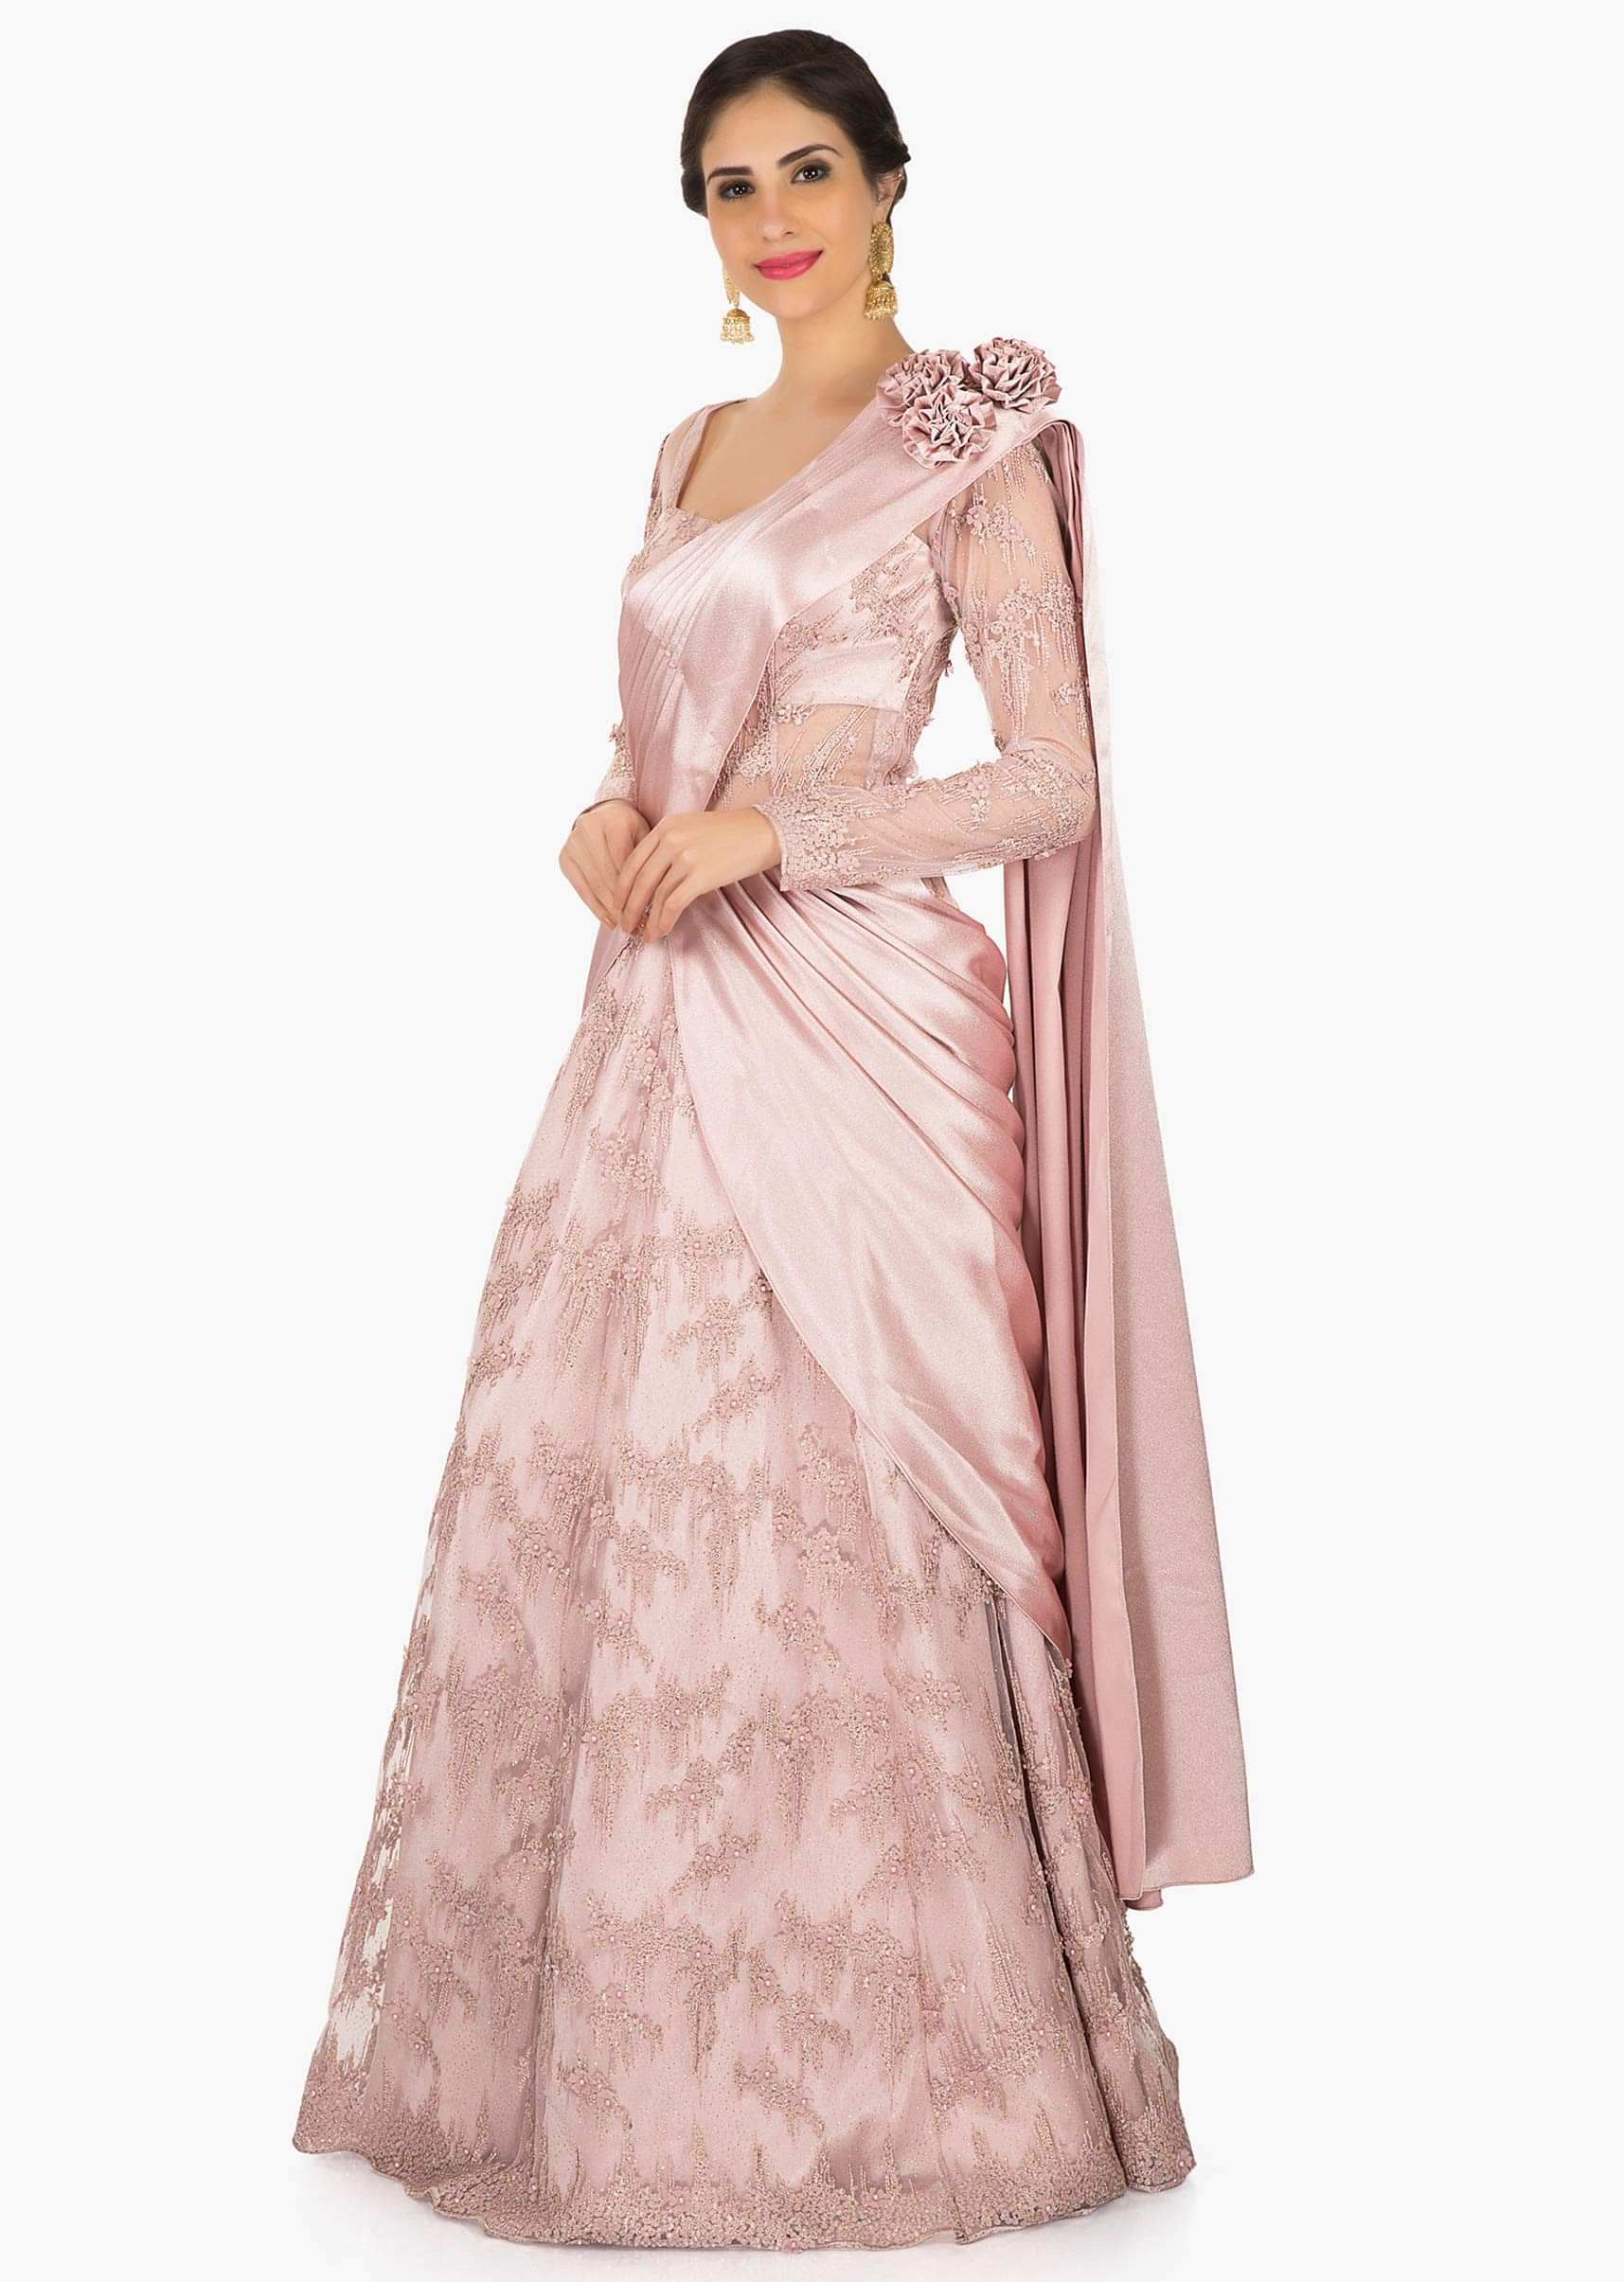 Pink Gown In Embroidered Net With Beautiful Cowl Drape Online - Kalki Fashion